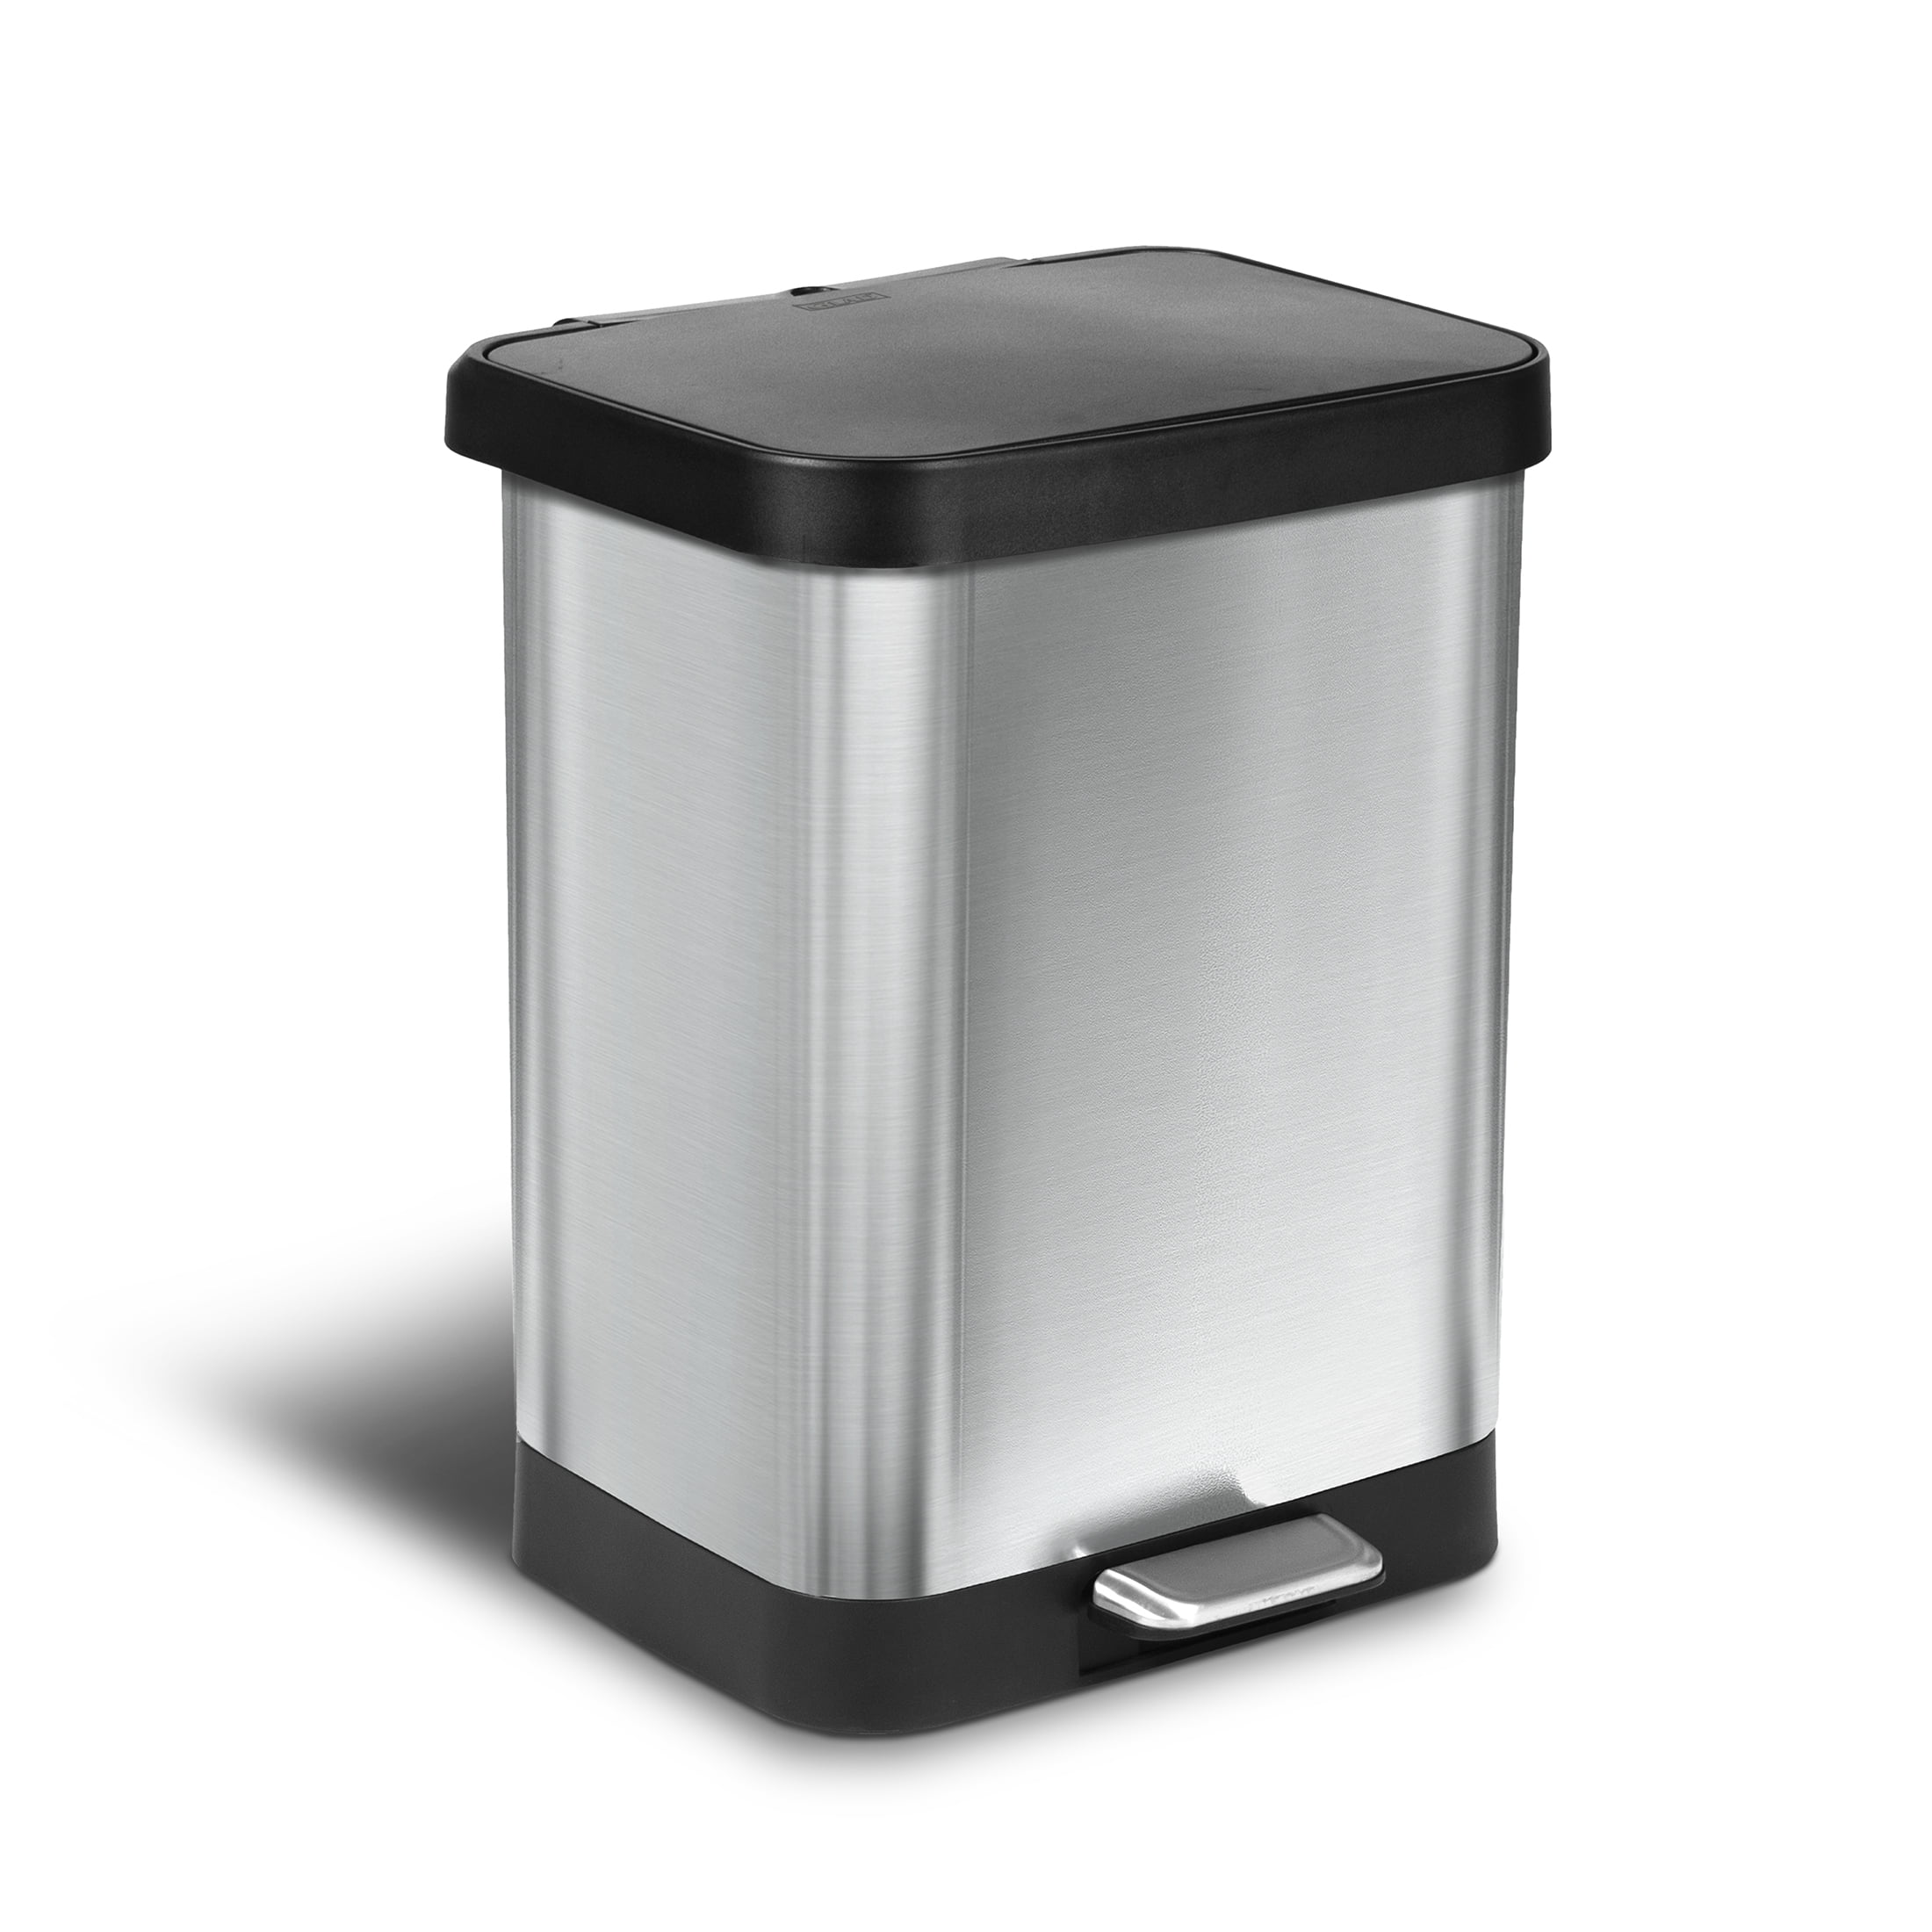 Glad Stainless Steel Step Trash Can with Clorox Odor Protection